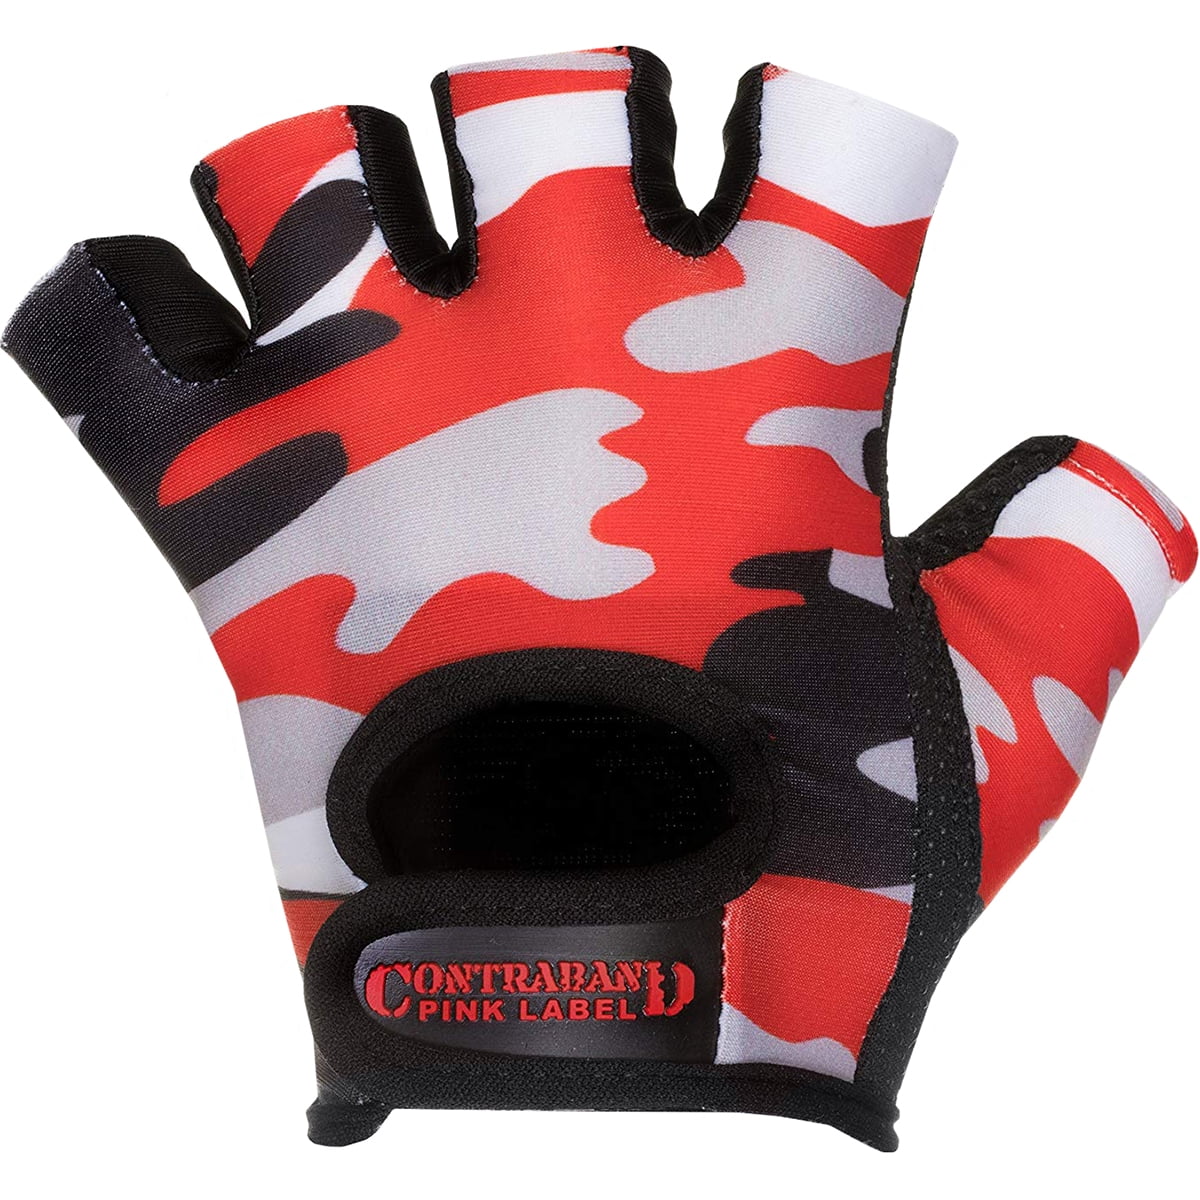 CLEARANCE 50% OFF!! PAIR .... Contraband Pink Label 5217 Camo Lifting Gloves 